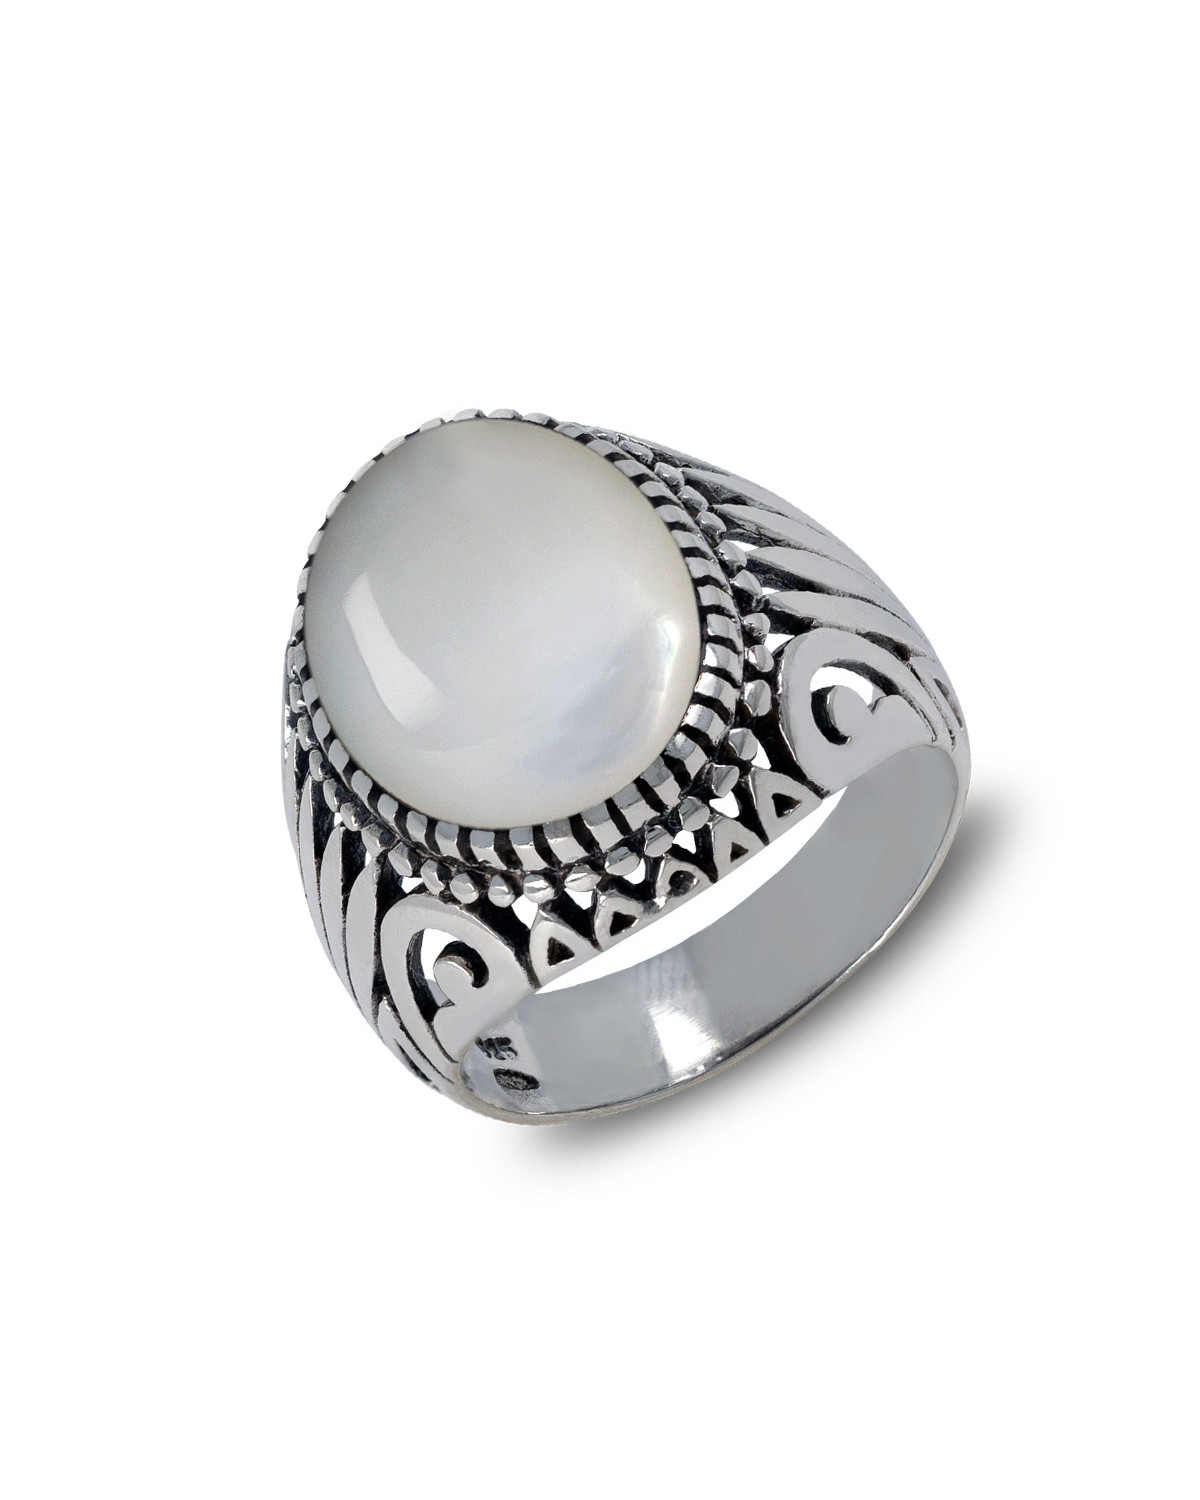 Antique effect 925 Sterling Silver White Mother-of-pearl Biker Ring